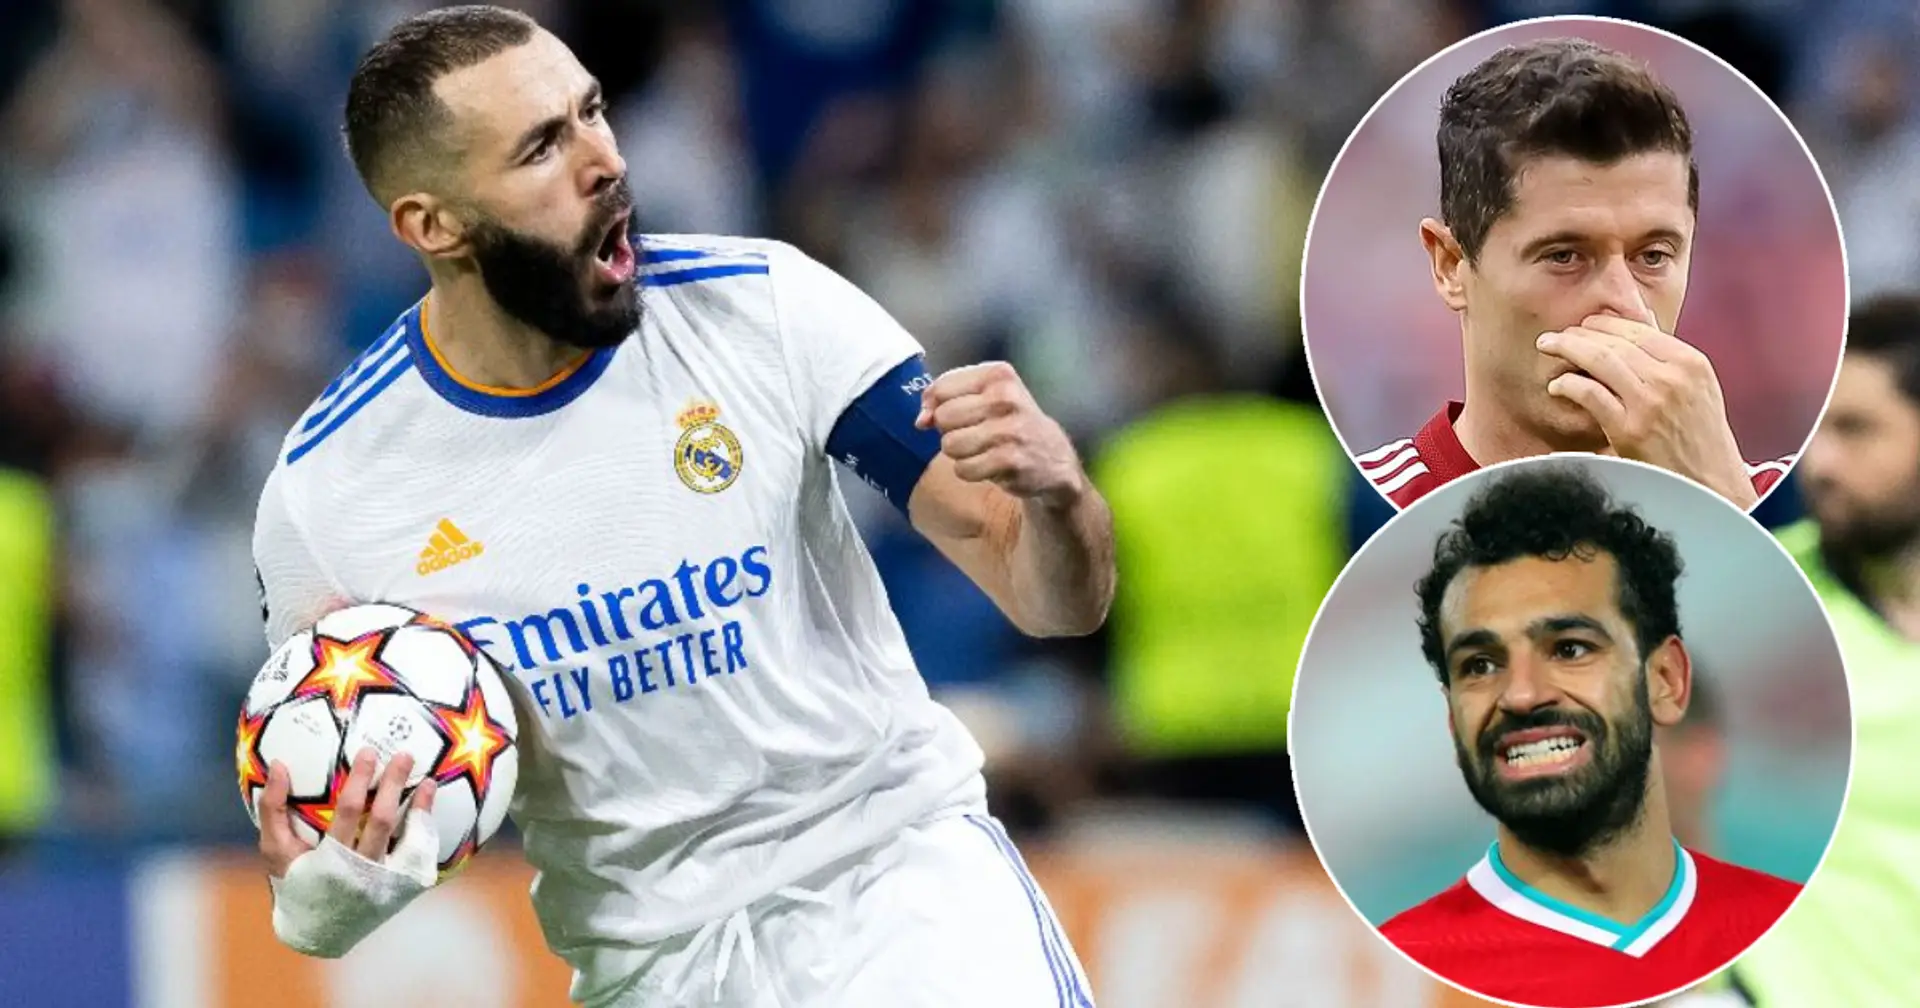 Benzema 1st: Strikers with most goals in Europe's top 5 leagues so far in 2021/22 